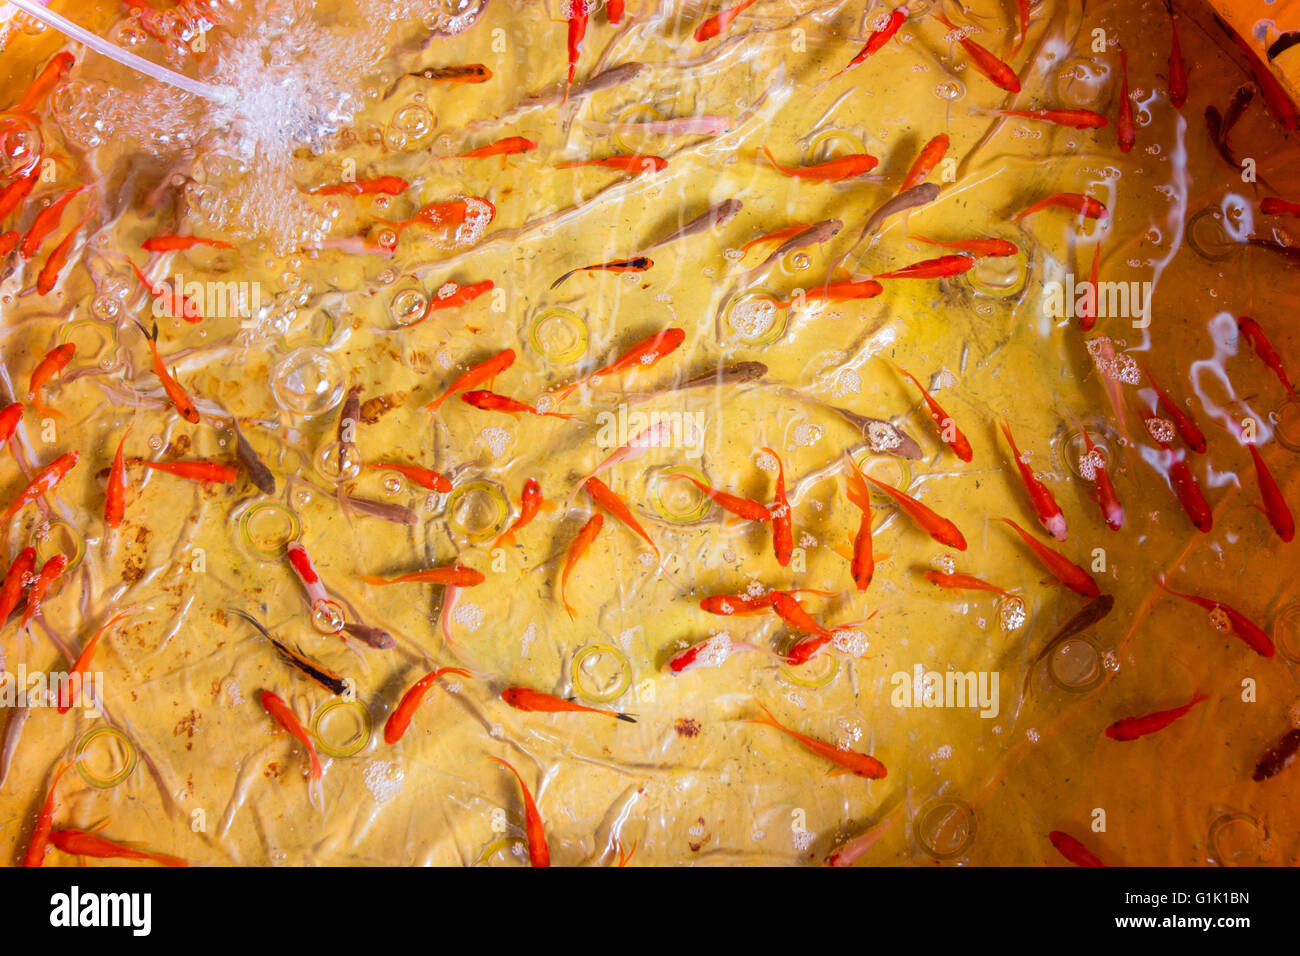 Small golden fish in clear water in a plastic pool Stock Photo